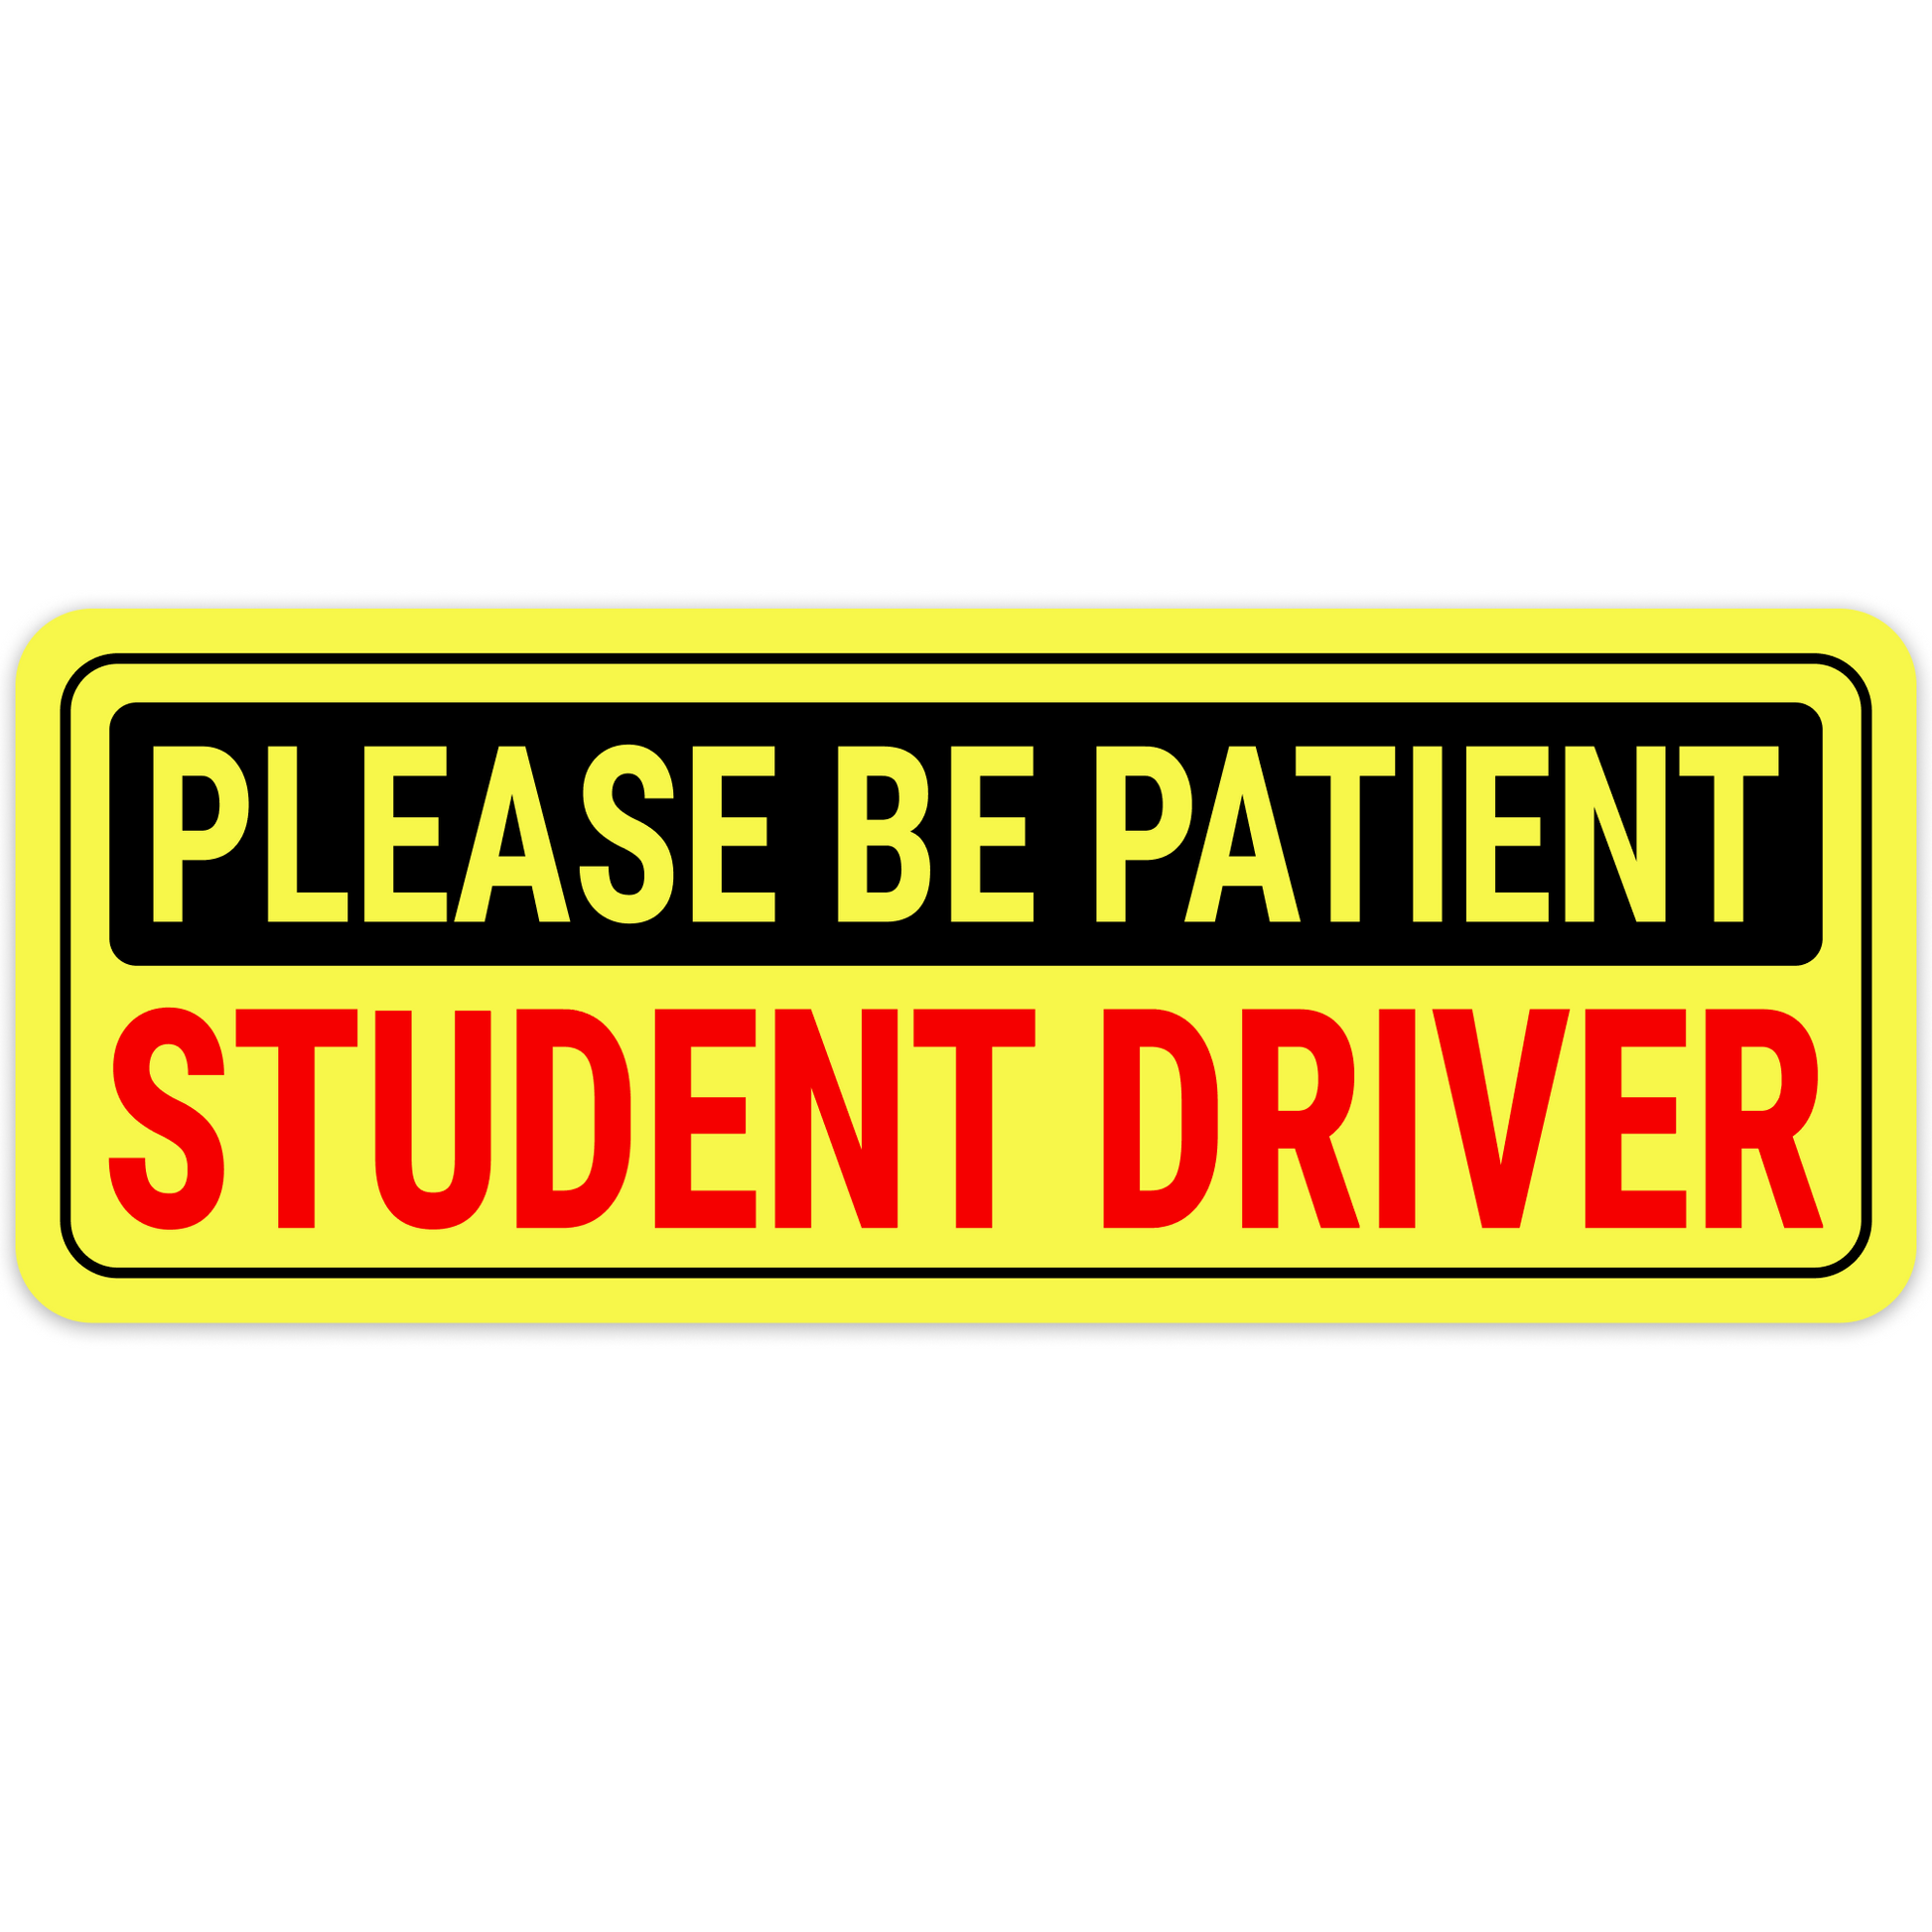 Stickios X-Large Student Driver Car Magnets (2-Pack), Yellow